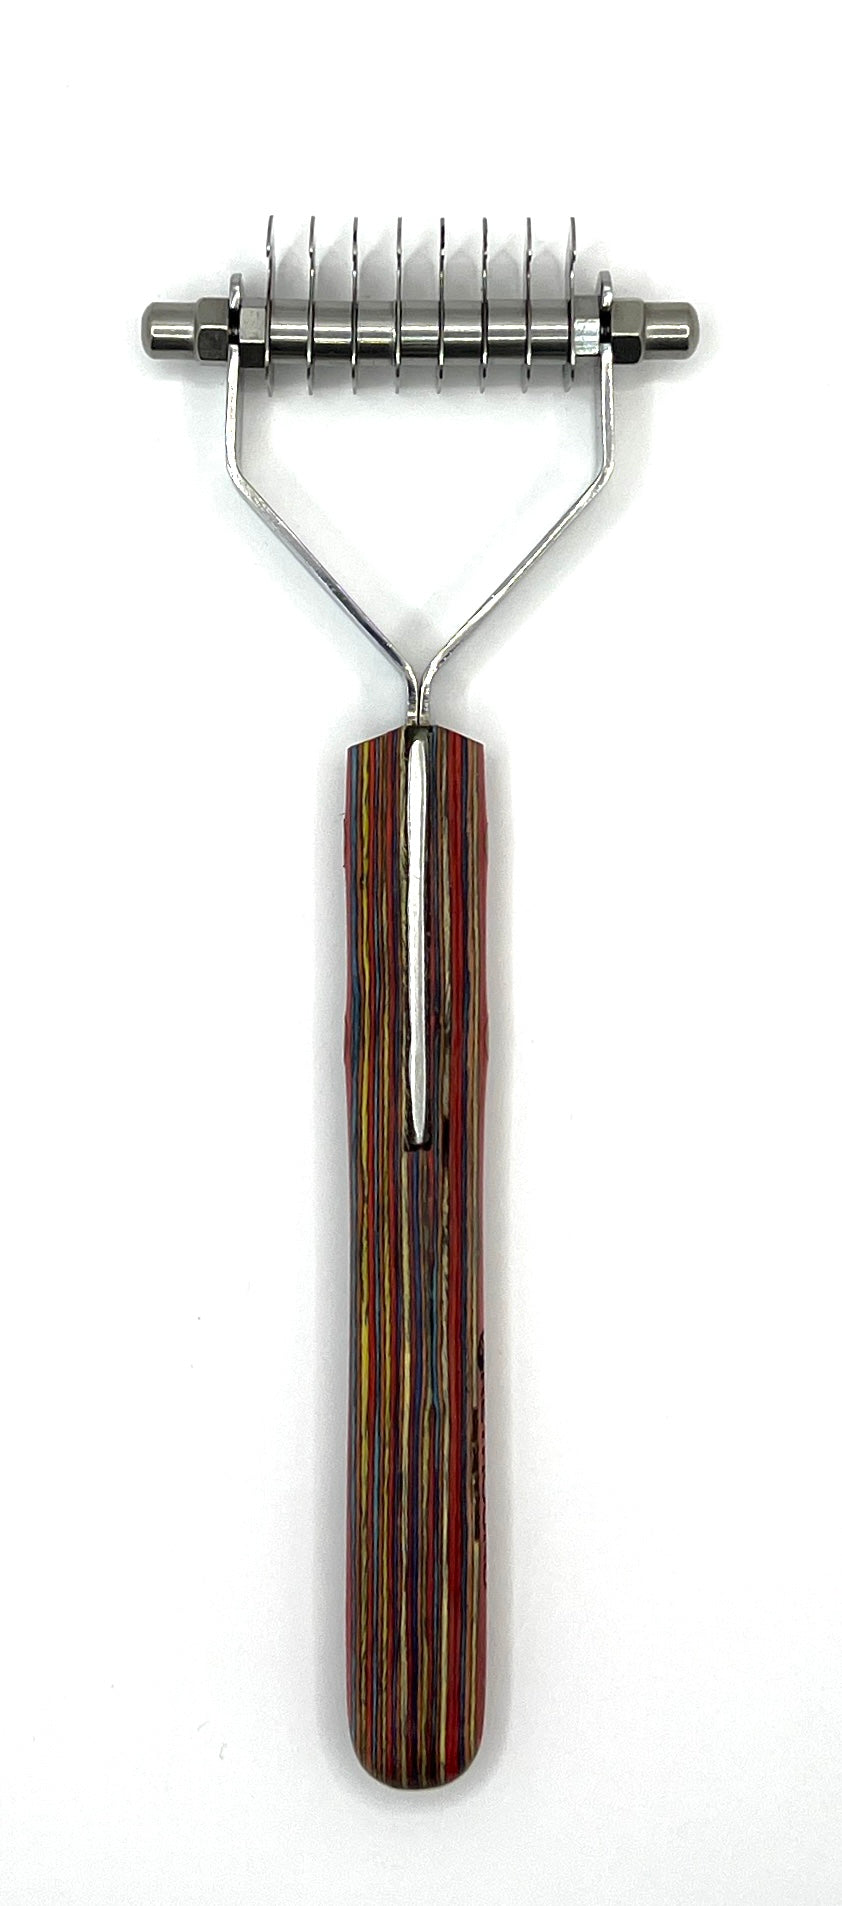 The Coat Master Rakes are the perfect tool for removing dead or thinning layers of undercoat from double-coated breeds. The 8-blade, specifically, also acts as a great de-matting tool since its teeth are spaced further apart. These grooming rakes are durably made from Malaysian Hardwood and Stainless Steel. 8 Blade